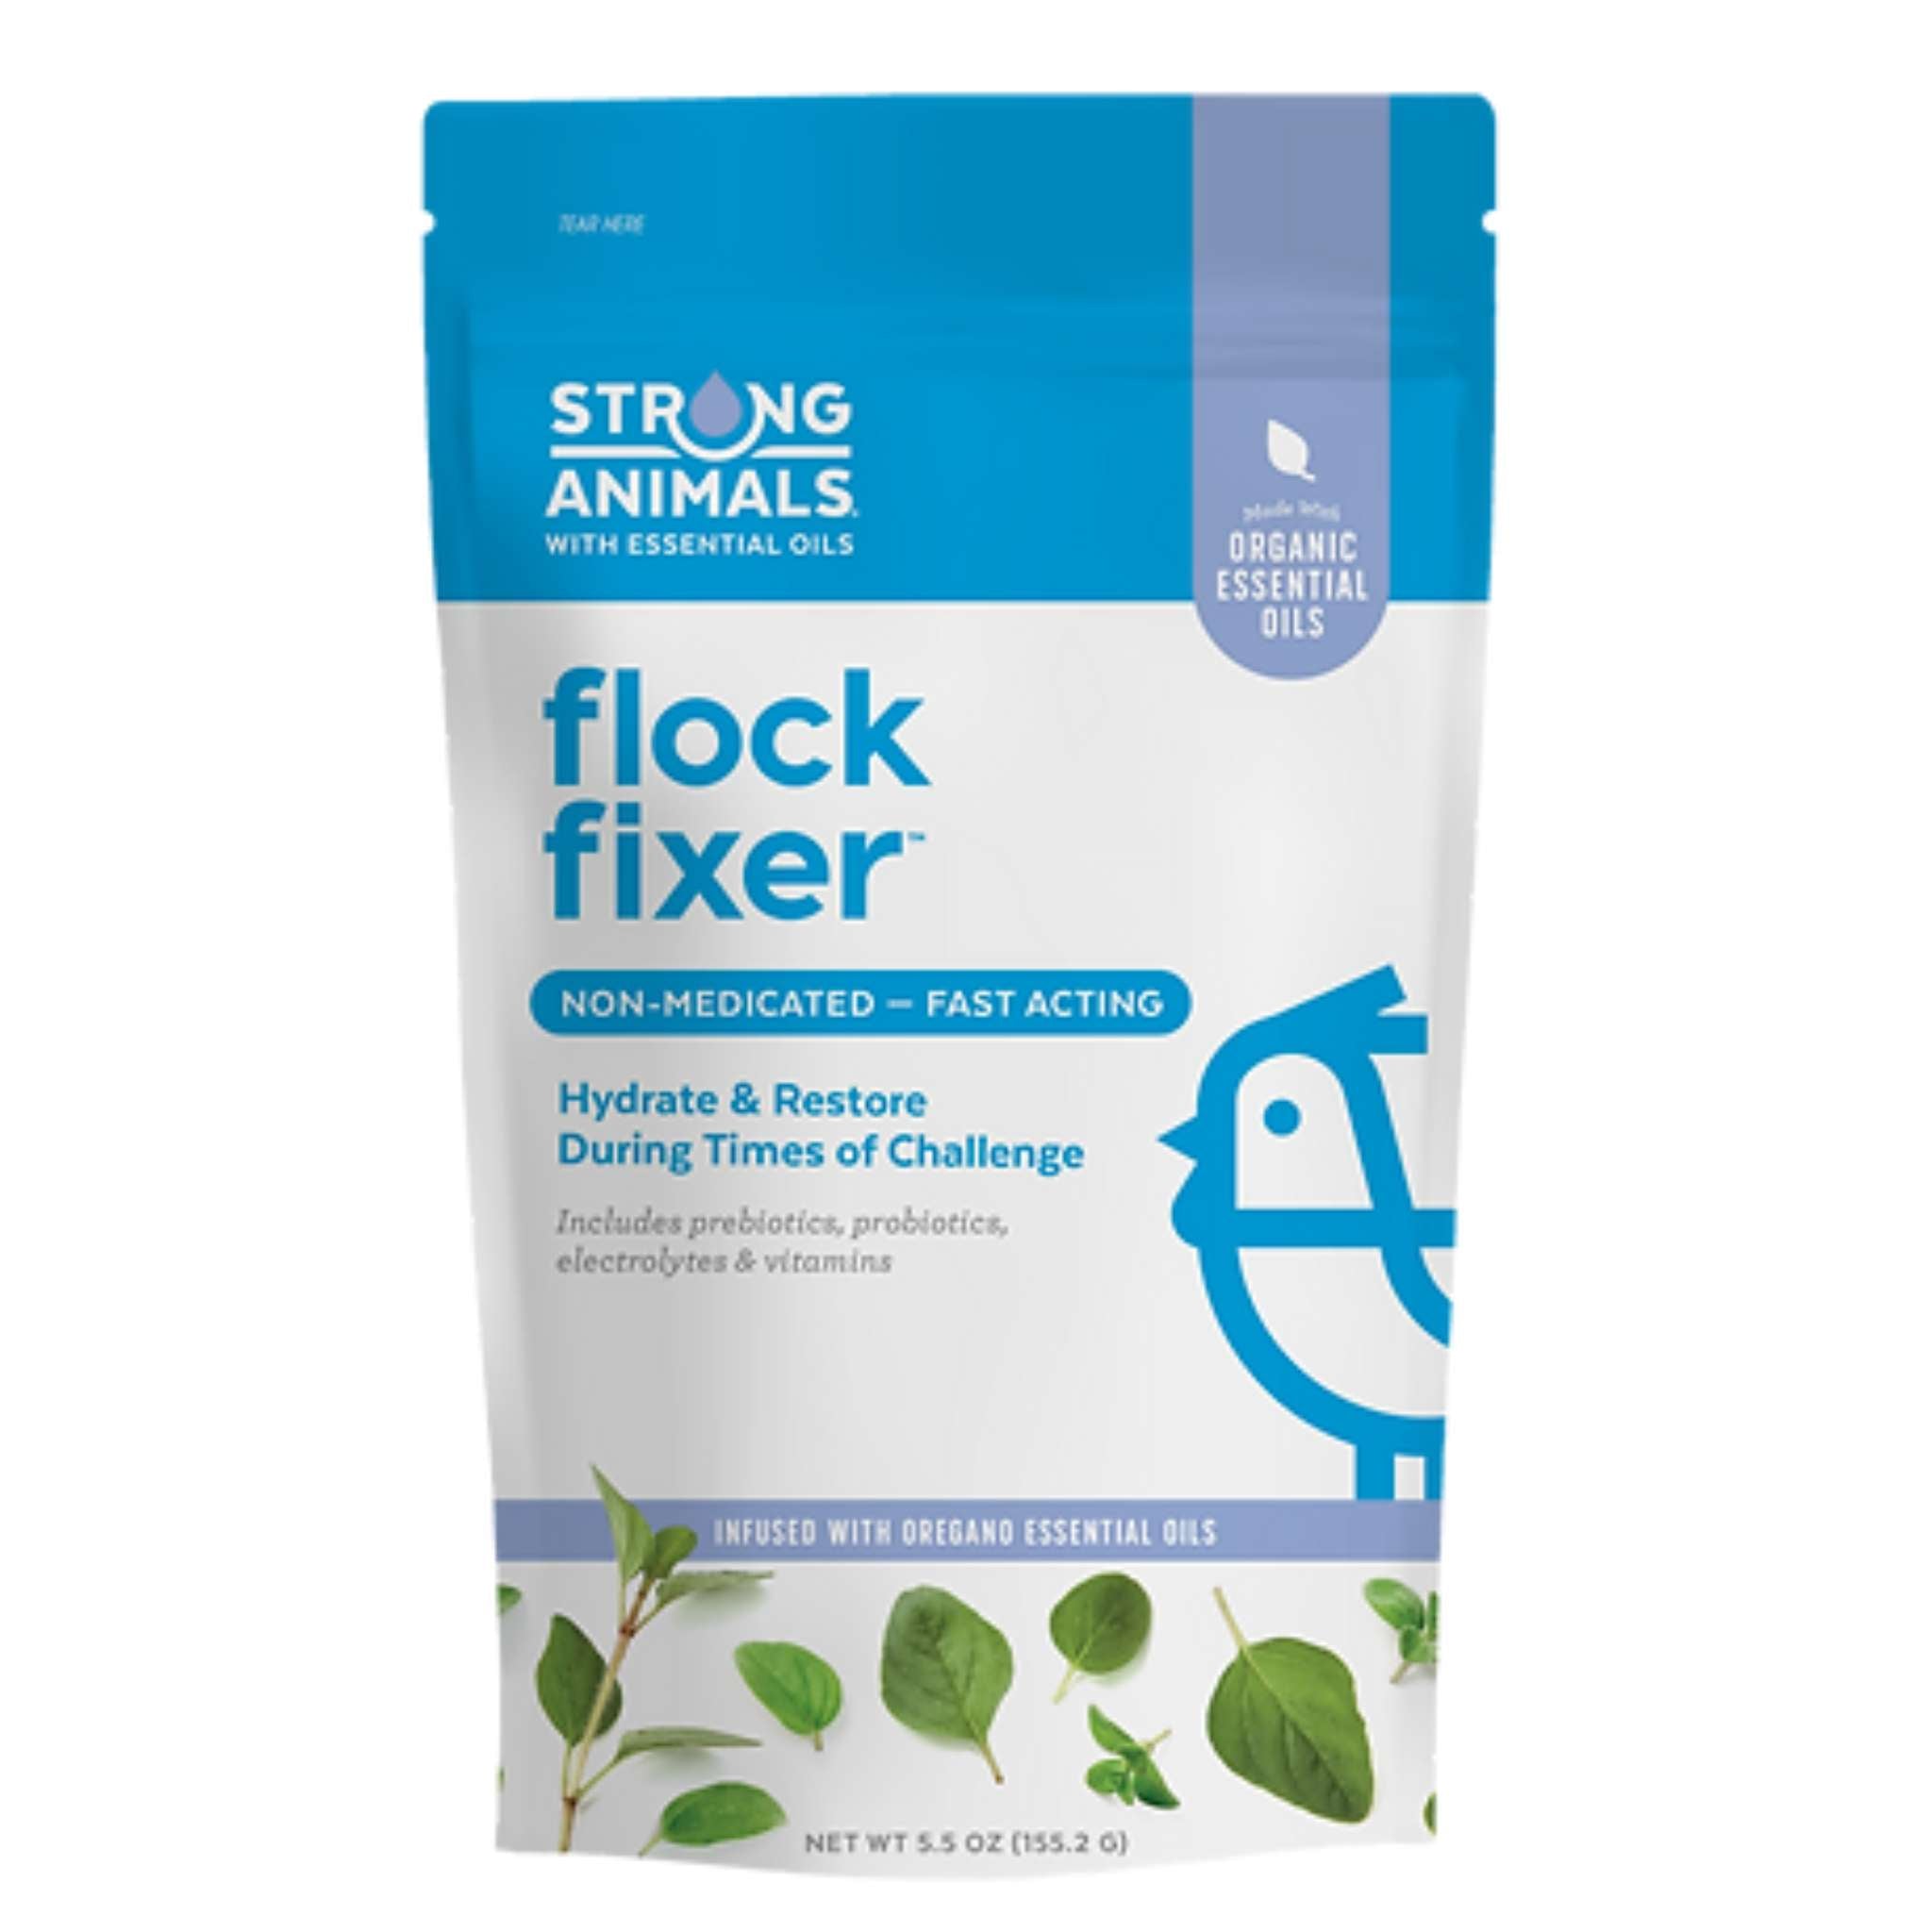 Hatching Time Strong Animals. Flock fixer non-medicated fast acting hydrate and restore during times of challenge